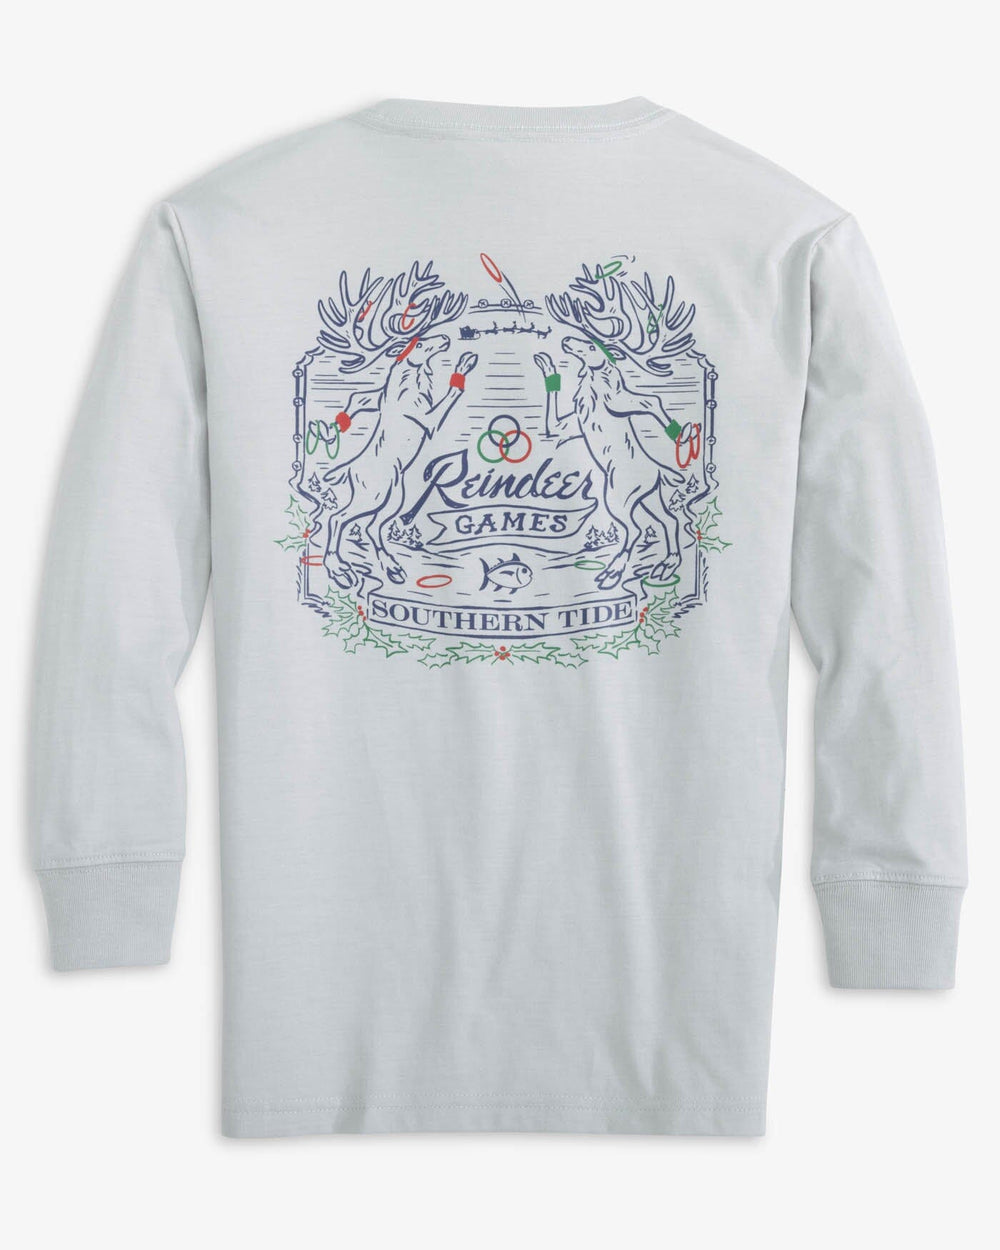 The back view of the Southern Tide Youth Heather Reindeer Games Long Sleeve T-shirt by Southern Tide - Heather Slate Grey